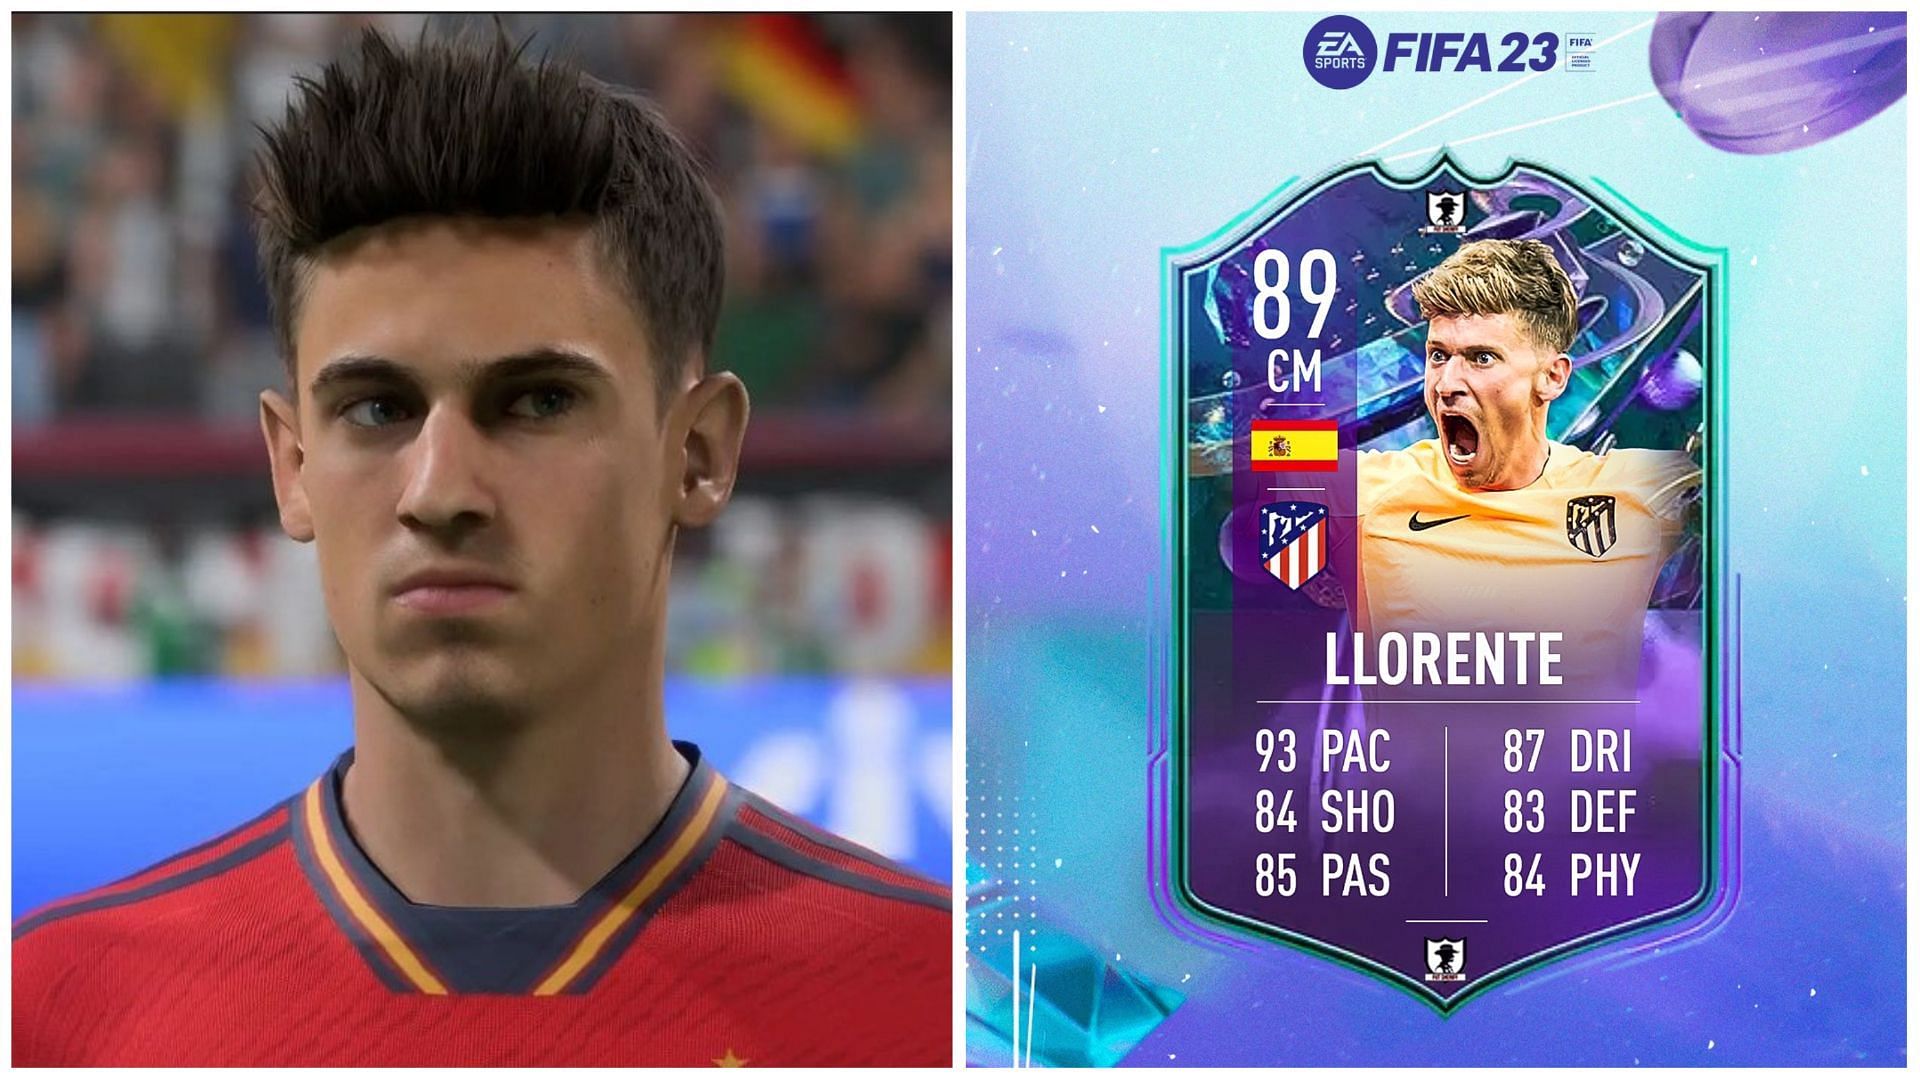 Fantasy FUT Llorente has been leaked (Images via EA Sports and Twitter/FUT Sheriff)